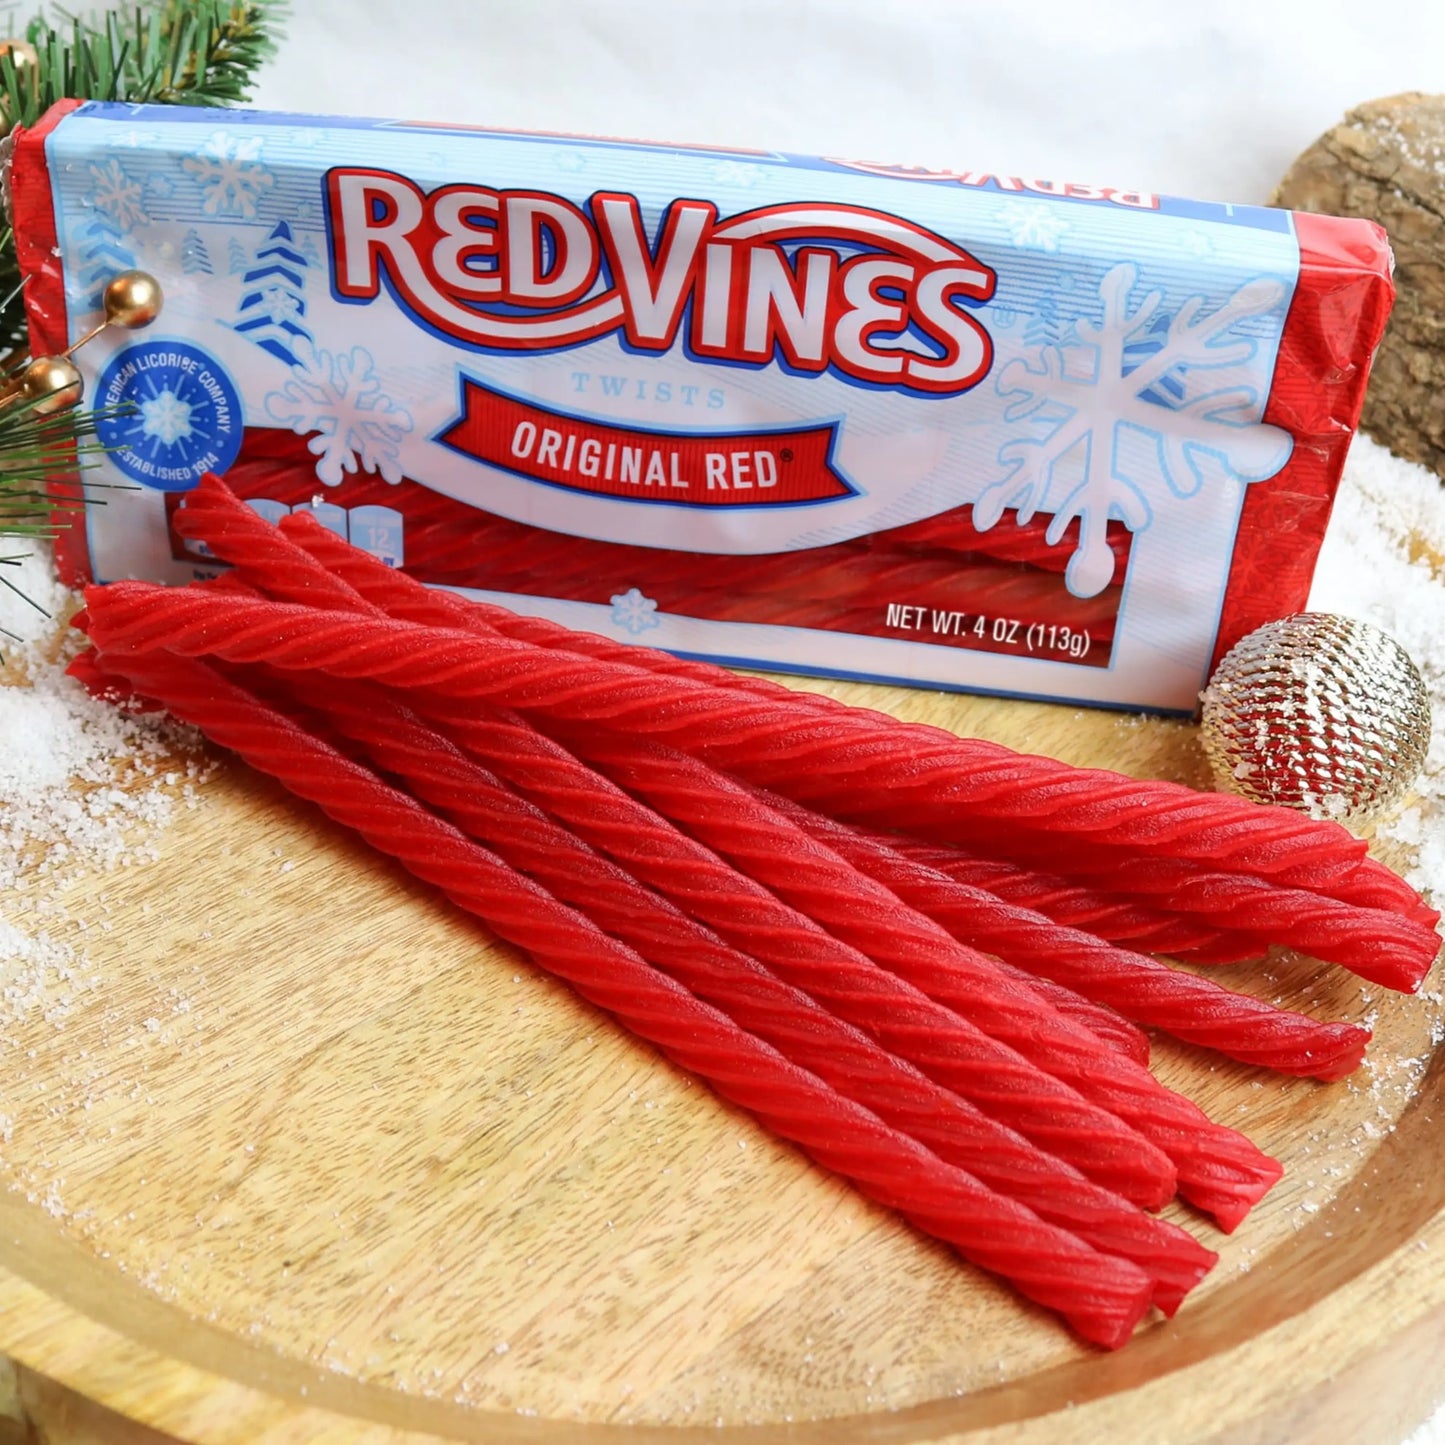 RED VINES Original Red Licorice Twists in winter seasonal tray with candy in front on a festive platter